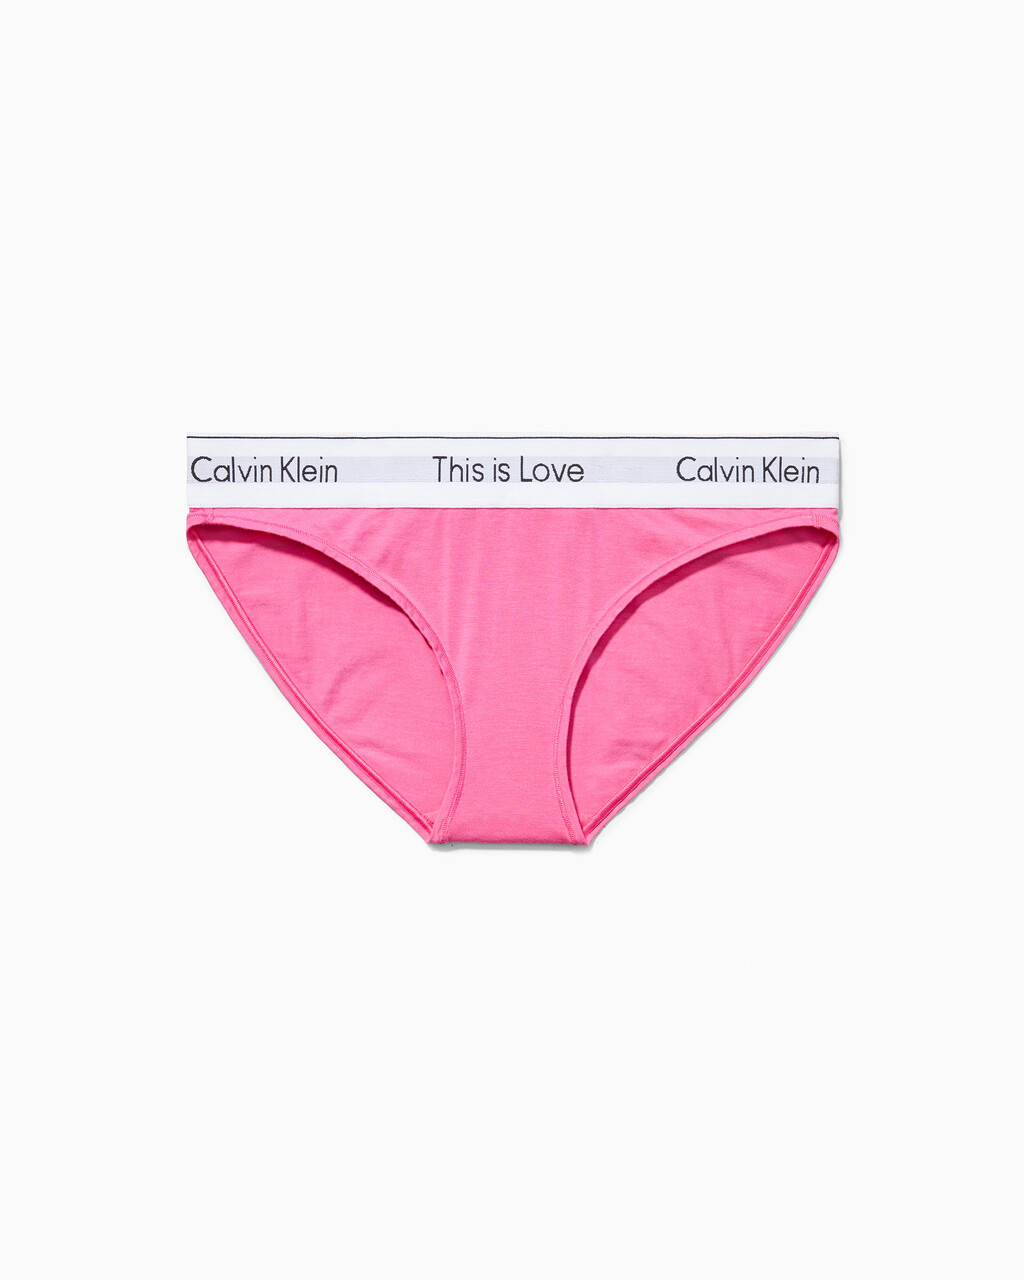 MODERN COTTON THIS IS LOVE 比基尼, Pink Flambe, hi-res